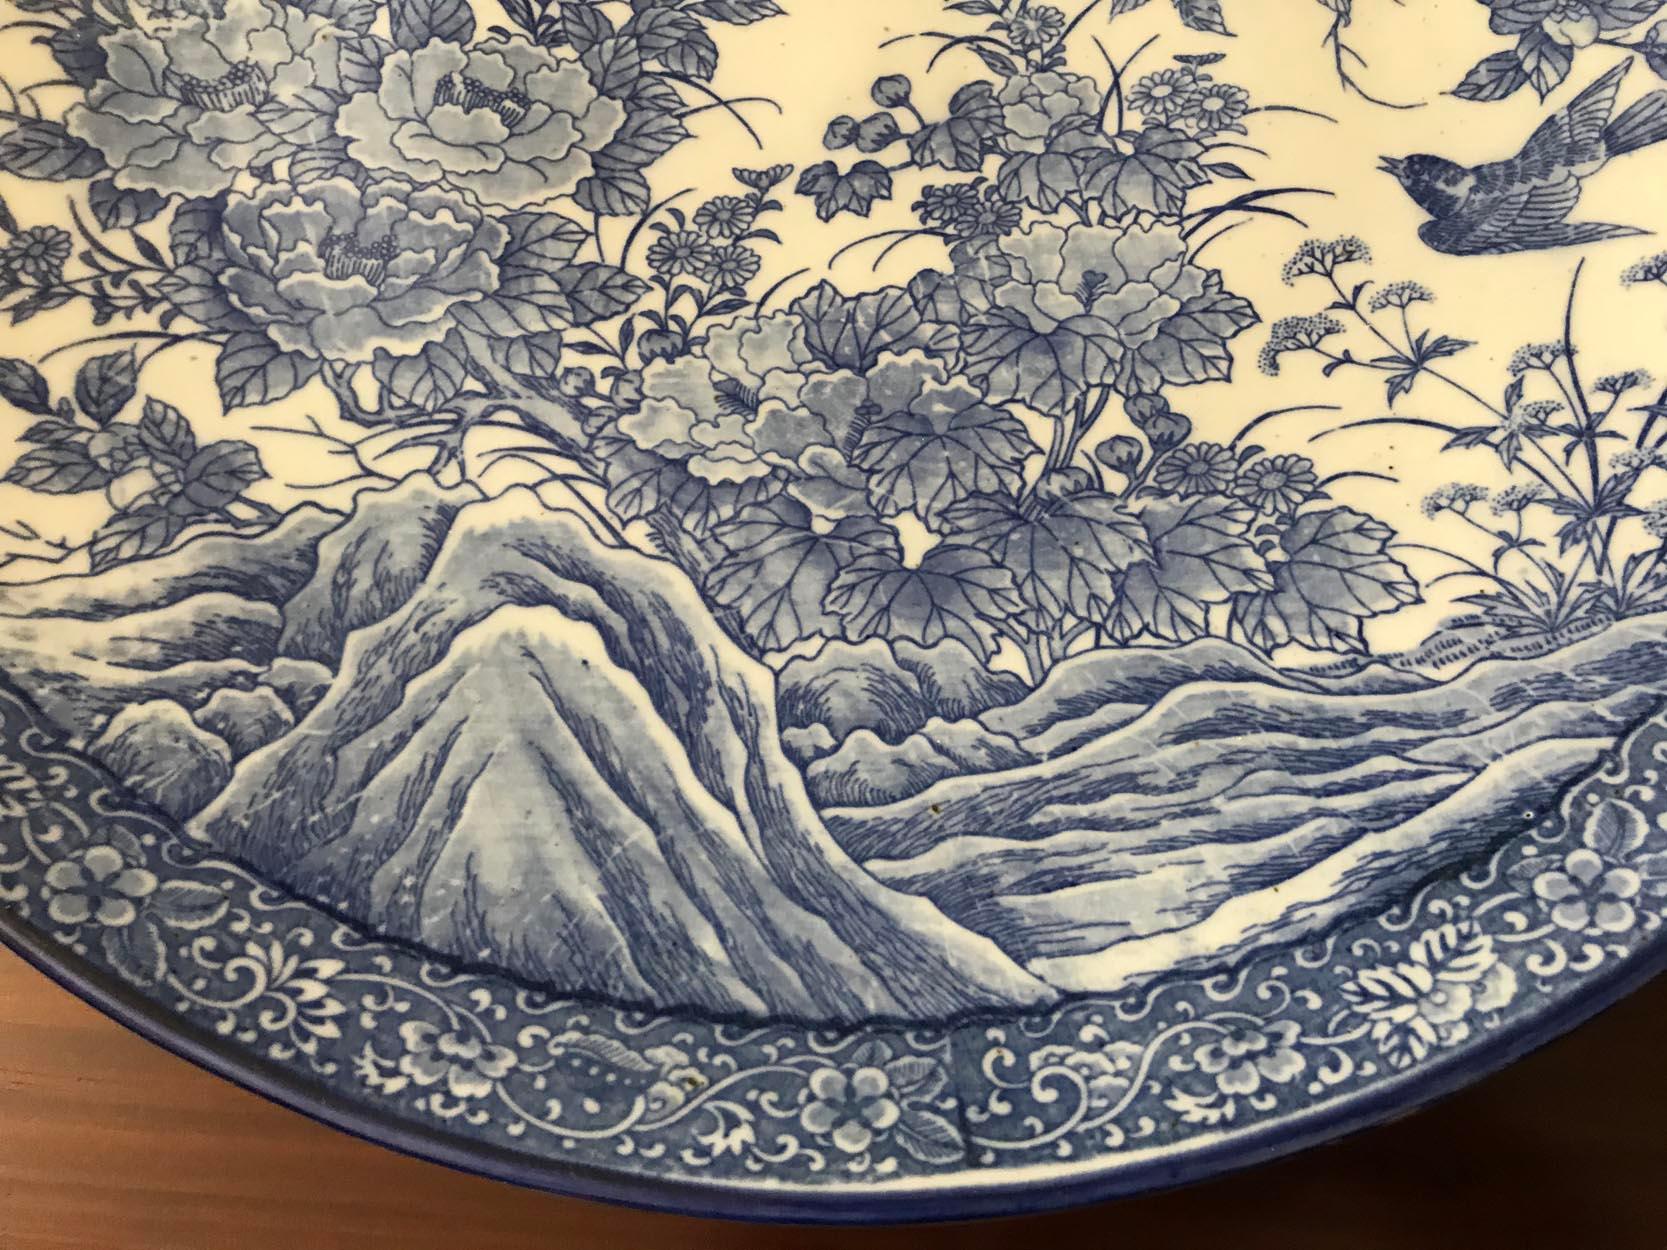 Meiji-period porcelain charger is ornamented in cobalt blue with a floral design incorporating a rocky outcrop, tree, chrysanthemums and a swooping swallow, with a decorative floral border.

In good condition with no chips, cracks and minimal wear.